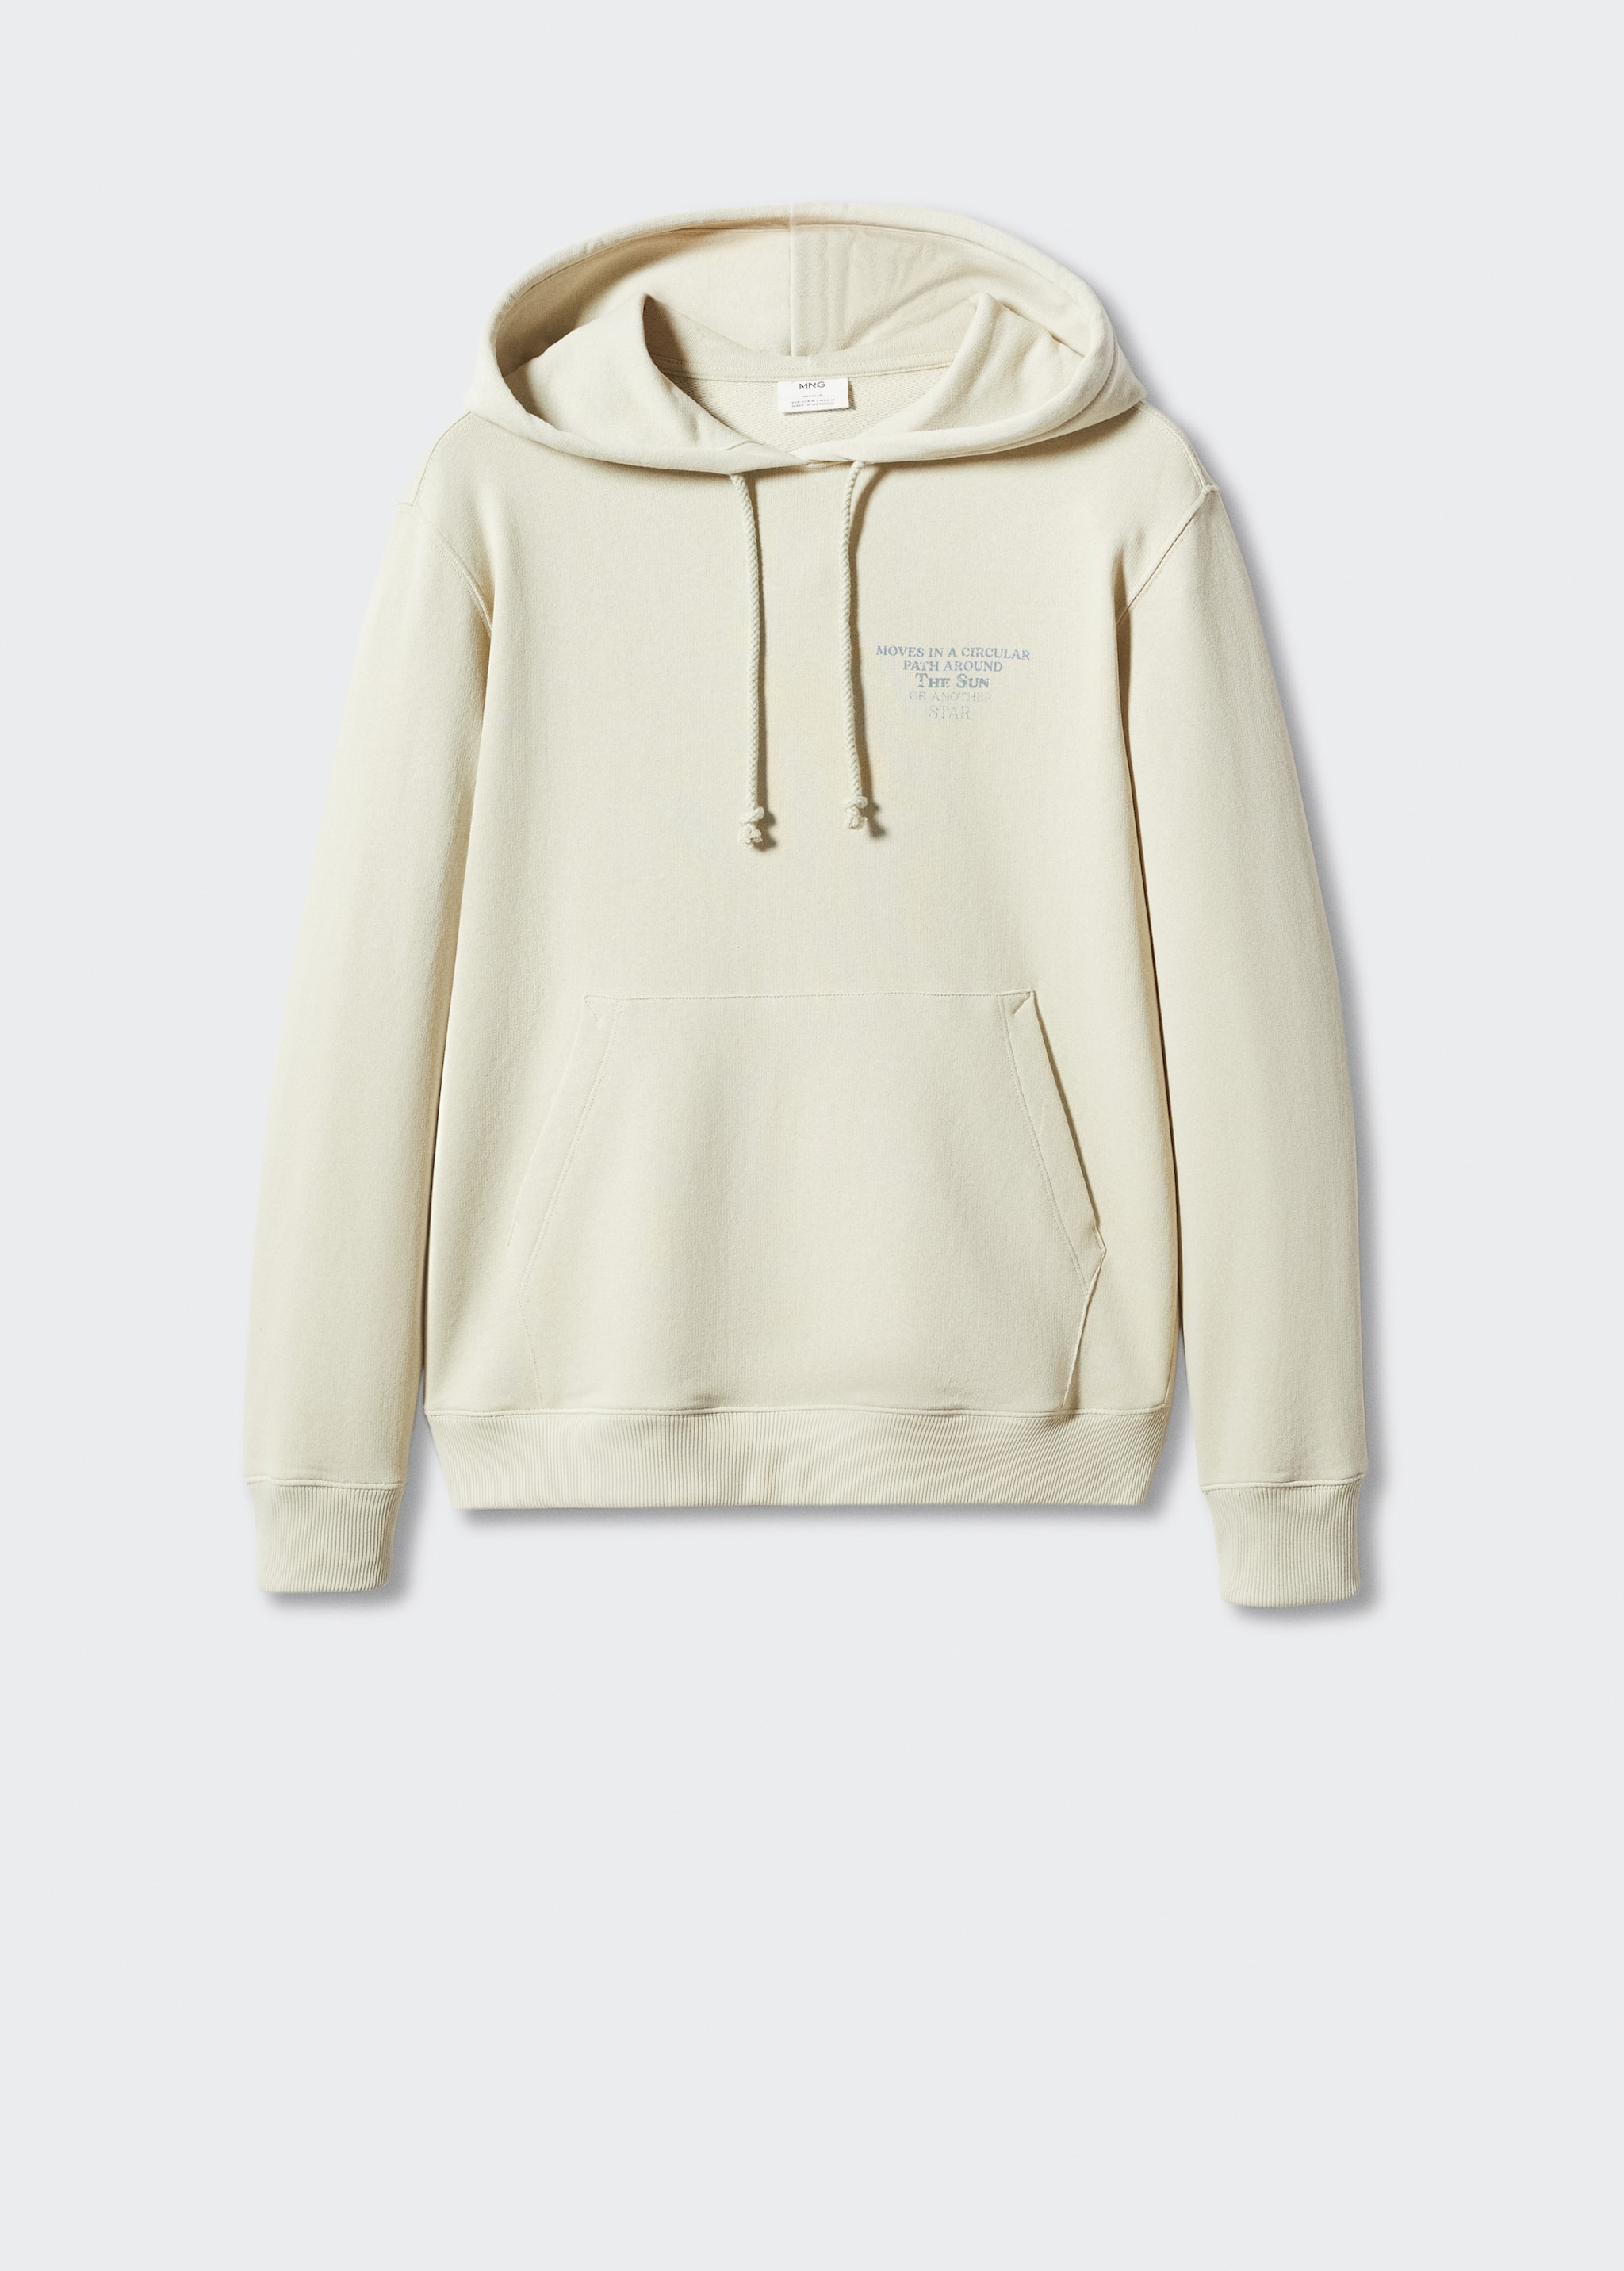 100% cotton hooded sweatshirt text - Article without model